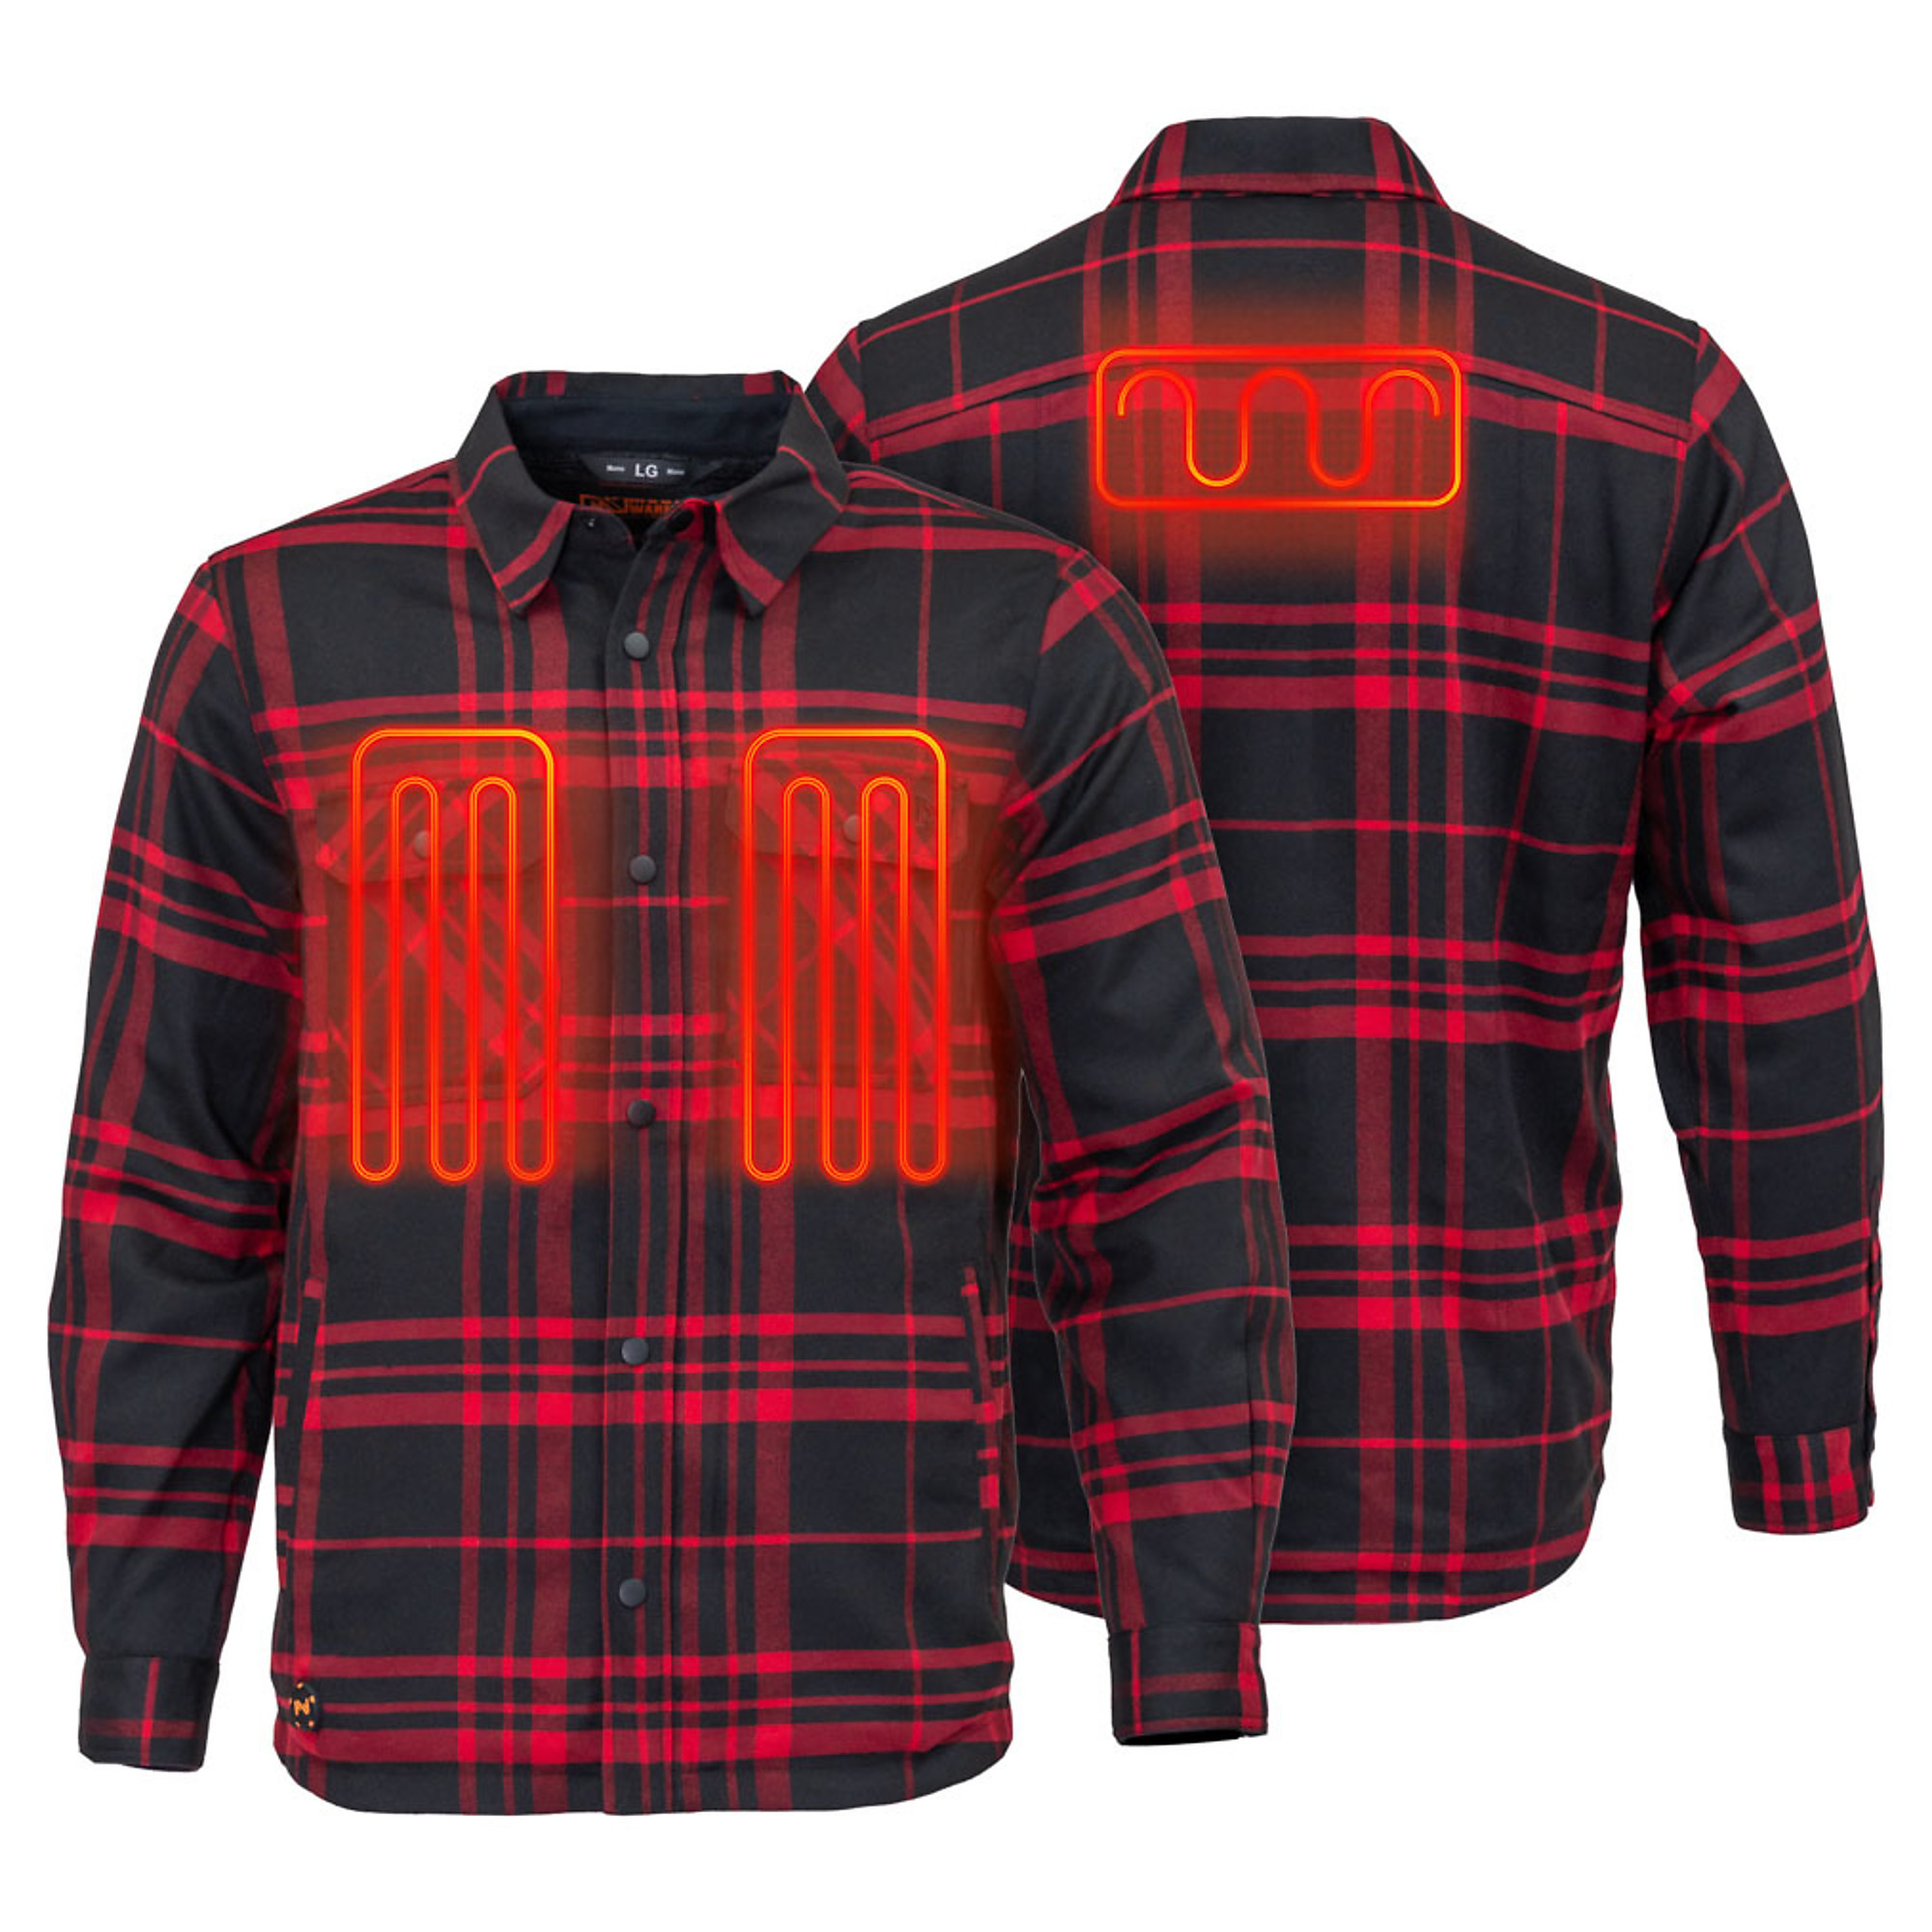 Fieldsheer, Men's Flannel Heated Jacket with 7.4v Battery, Size S, Color Black / Red, Model MWMJ53010223